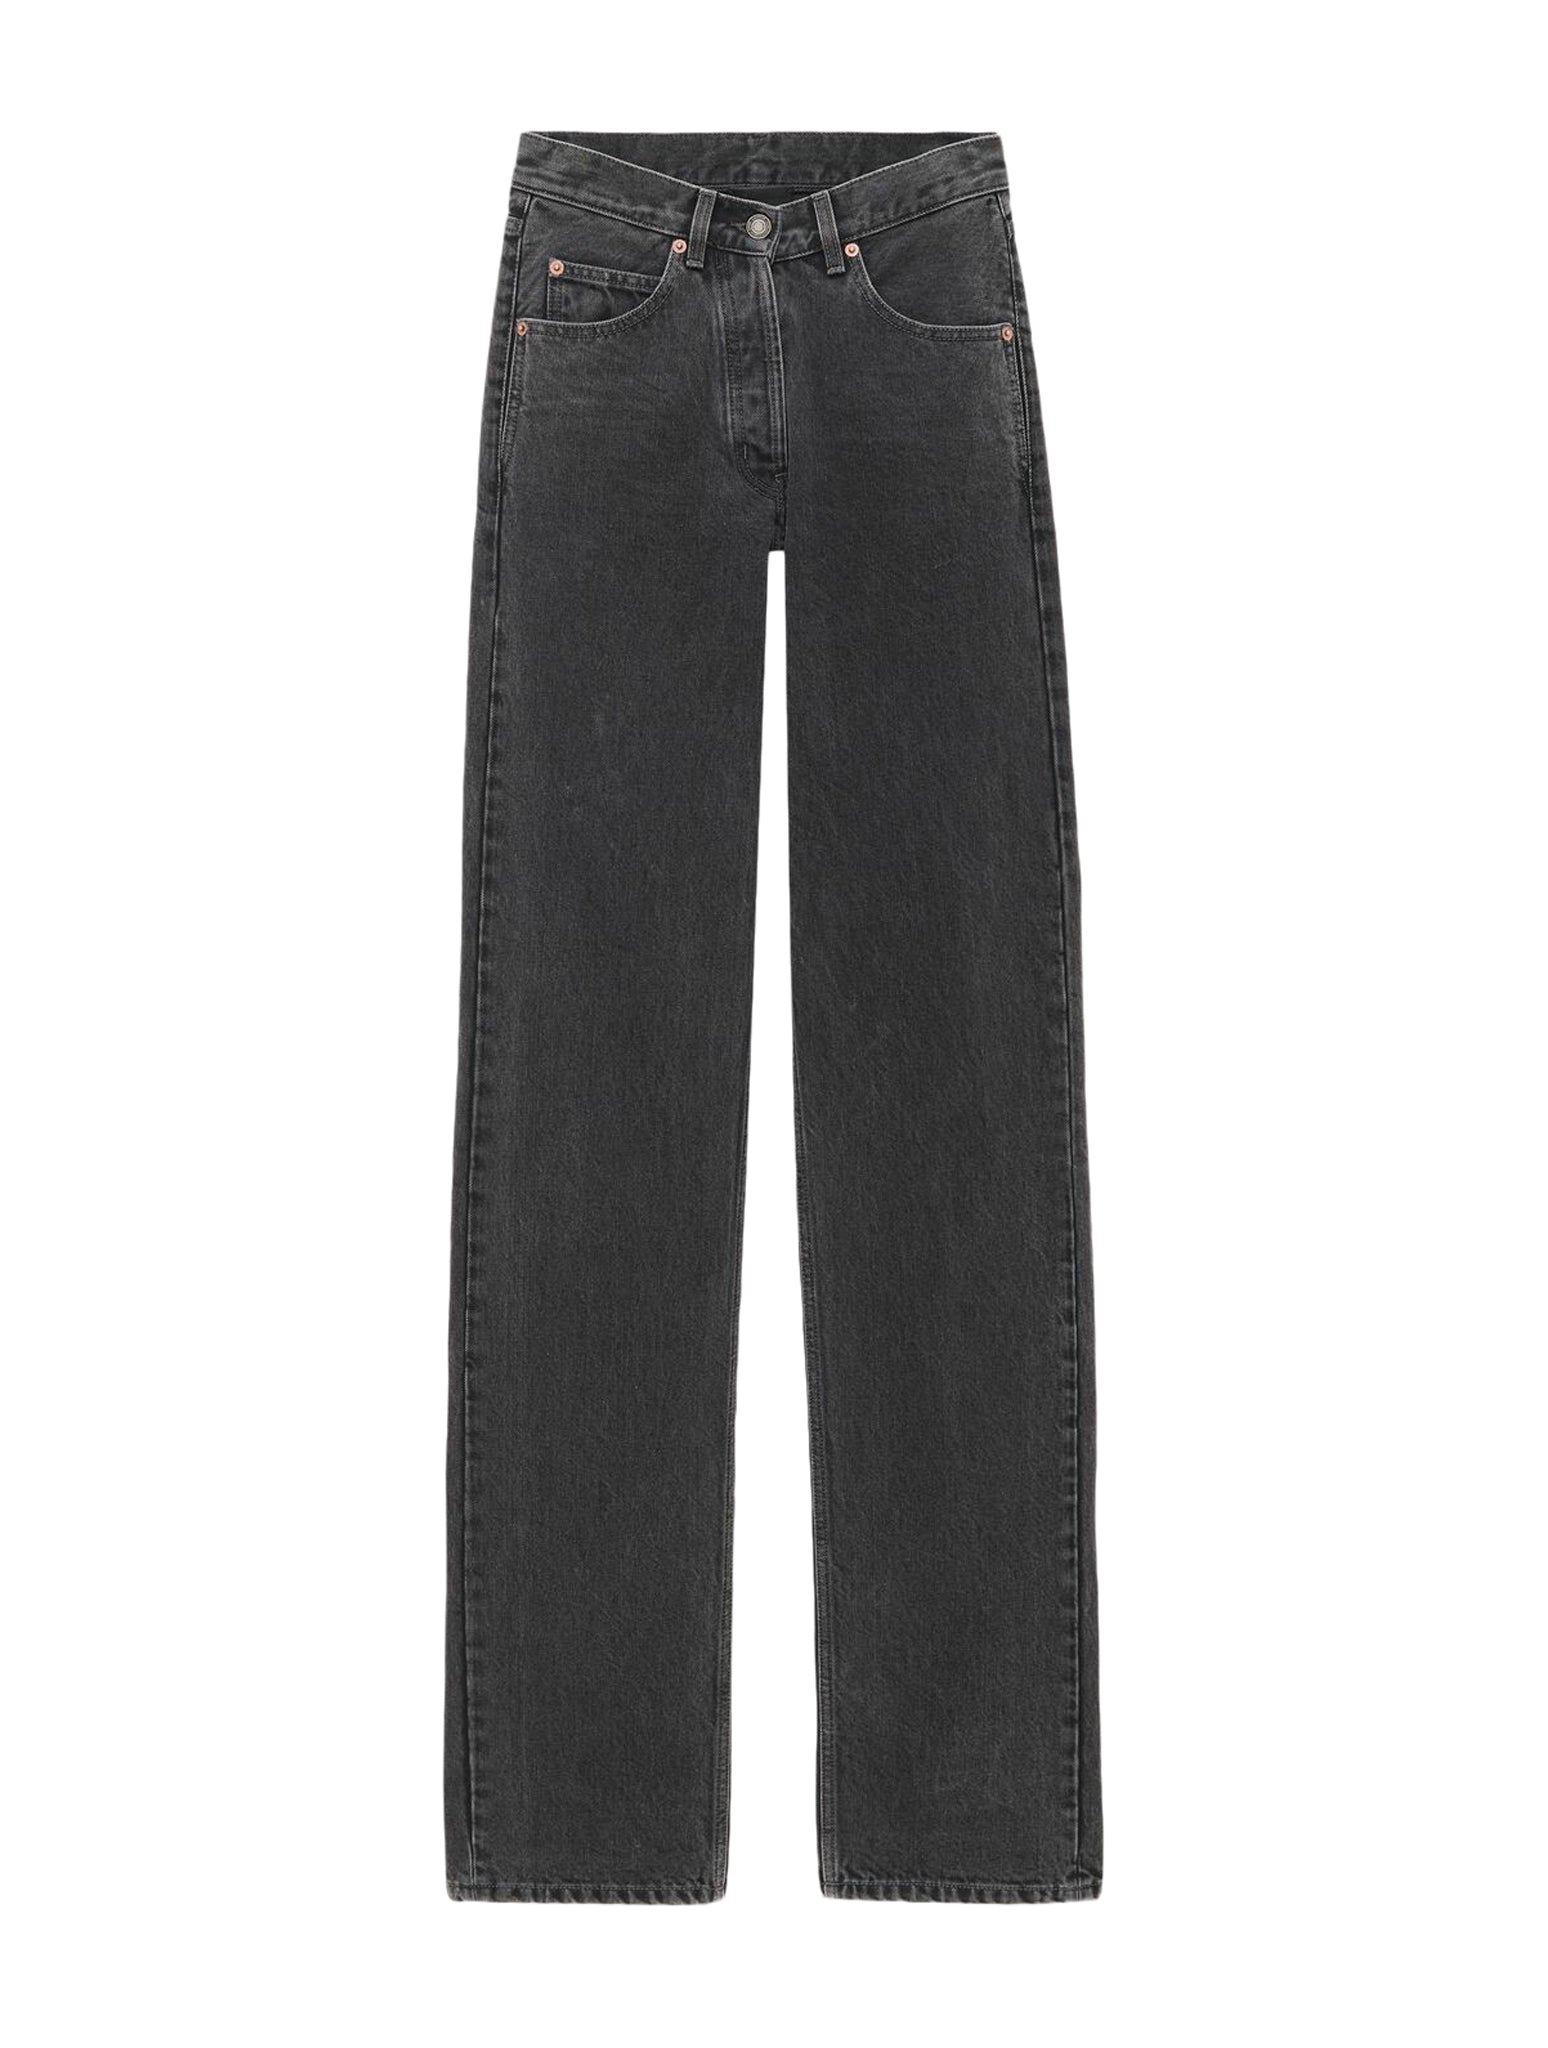 WIDE AND LONG JEANS WITH V-WAIST IN BLACK DENIM FROM THE 90S